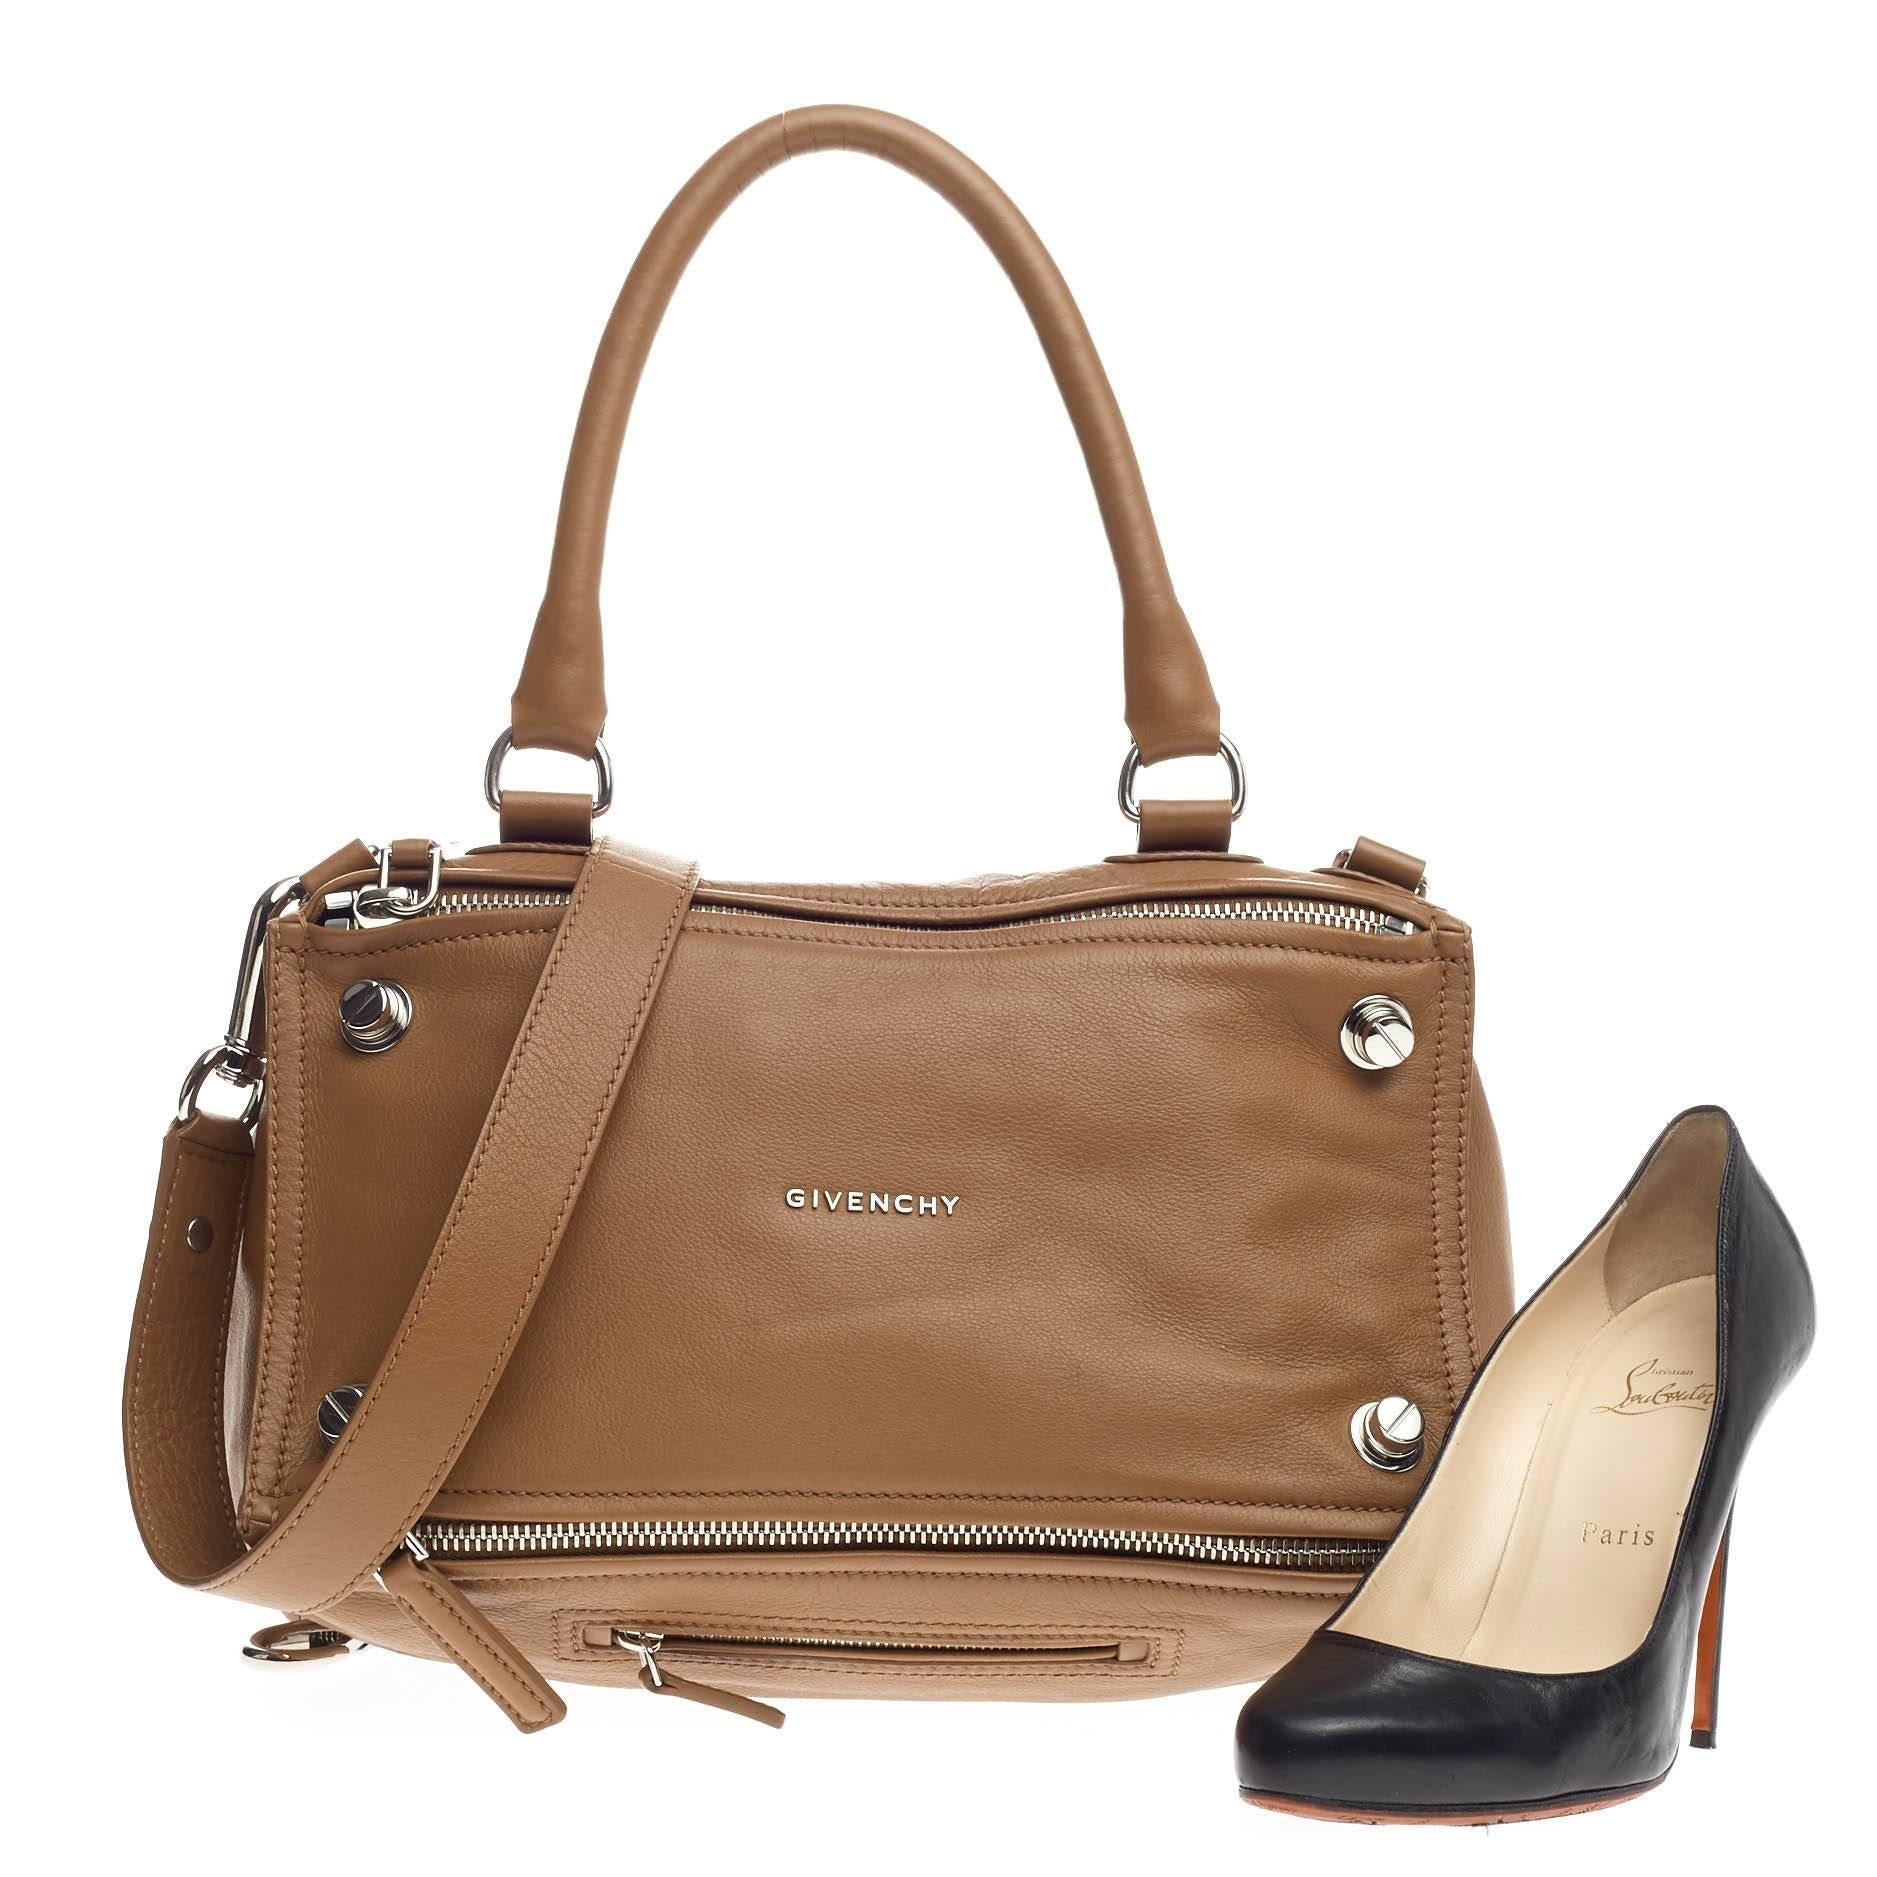 This authentic Givenchy Pandora Bag Bolt Stud Leather Medium is the perfect companion for any on-the-go fashionista. Crafted from brown leather, this edgy and cult-favorite satchel features a pandora box-inspired silhouette, a singular top handle,